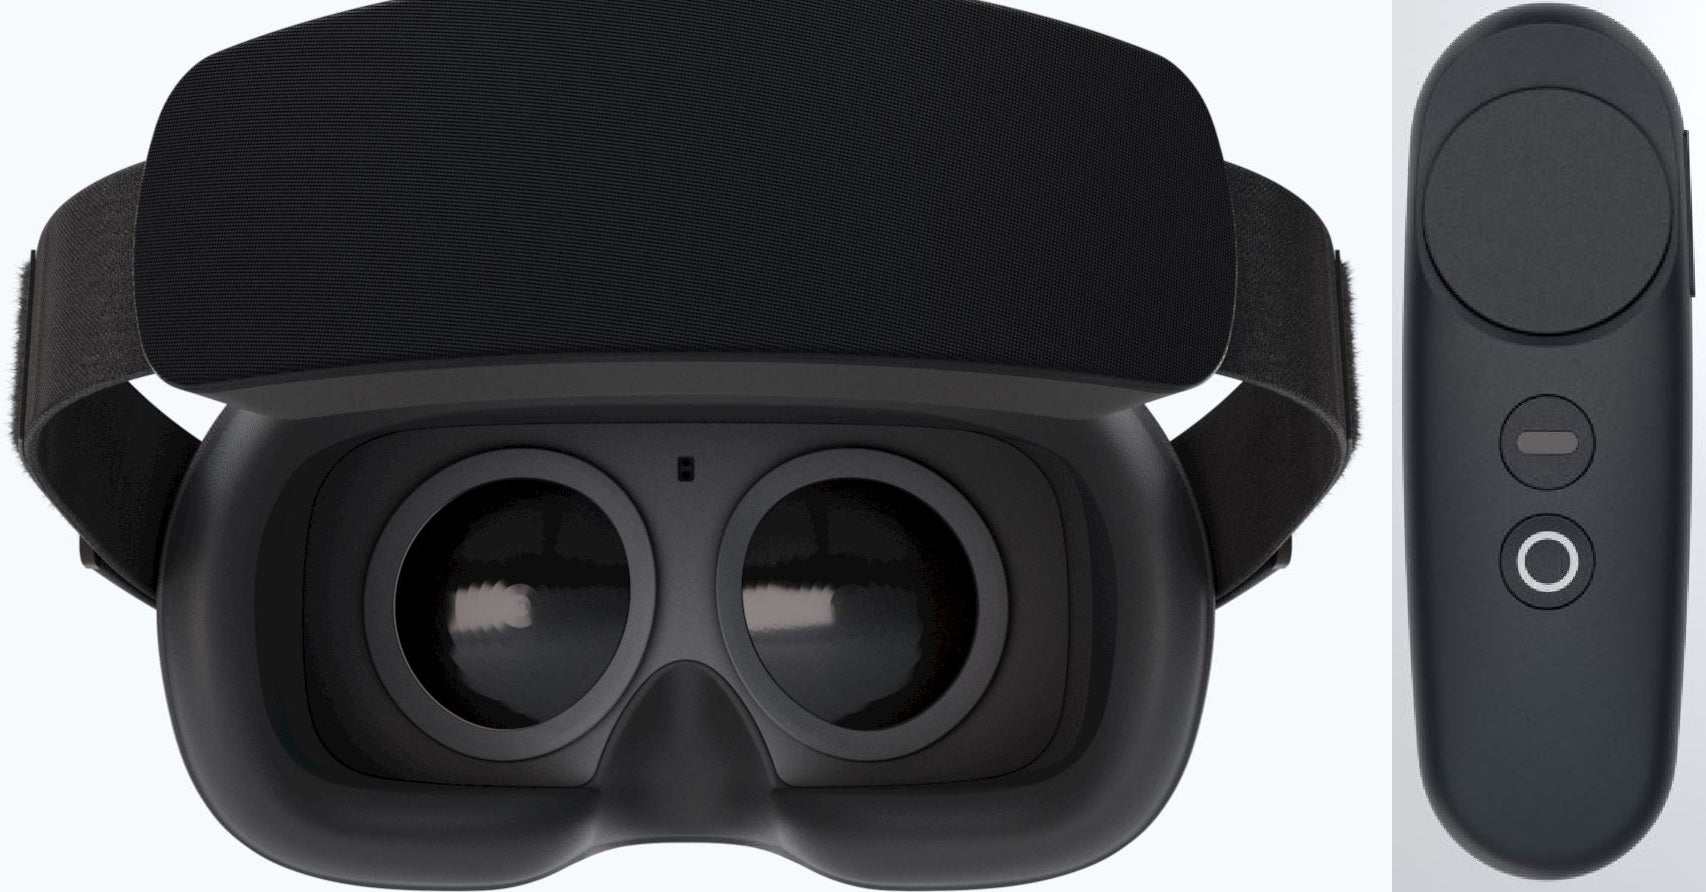 Back of the headset and a controller - Lenovo announces the all-in-one Mirage VR S3 headset